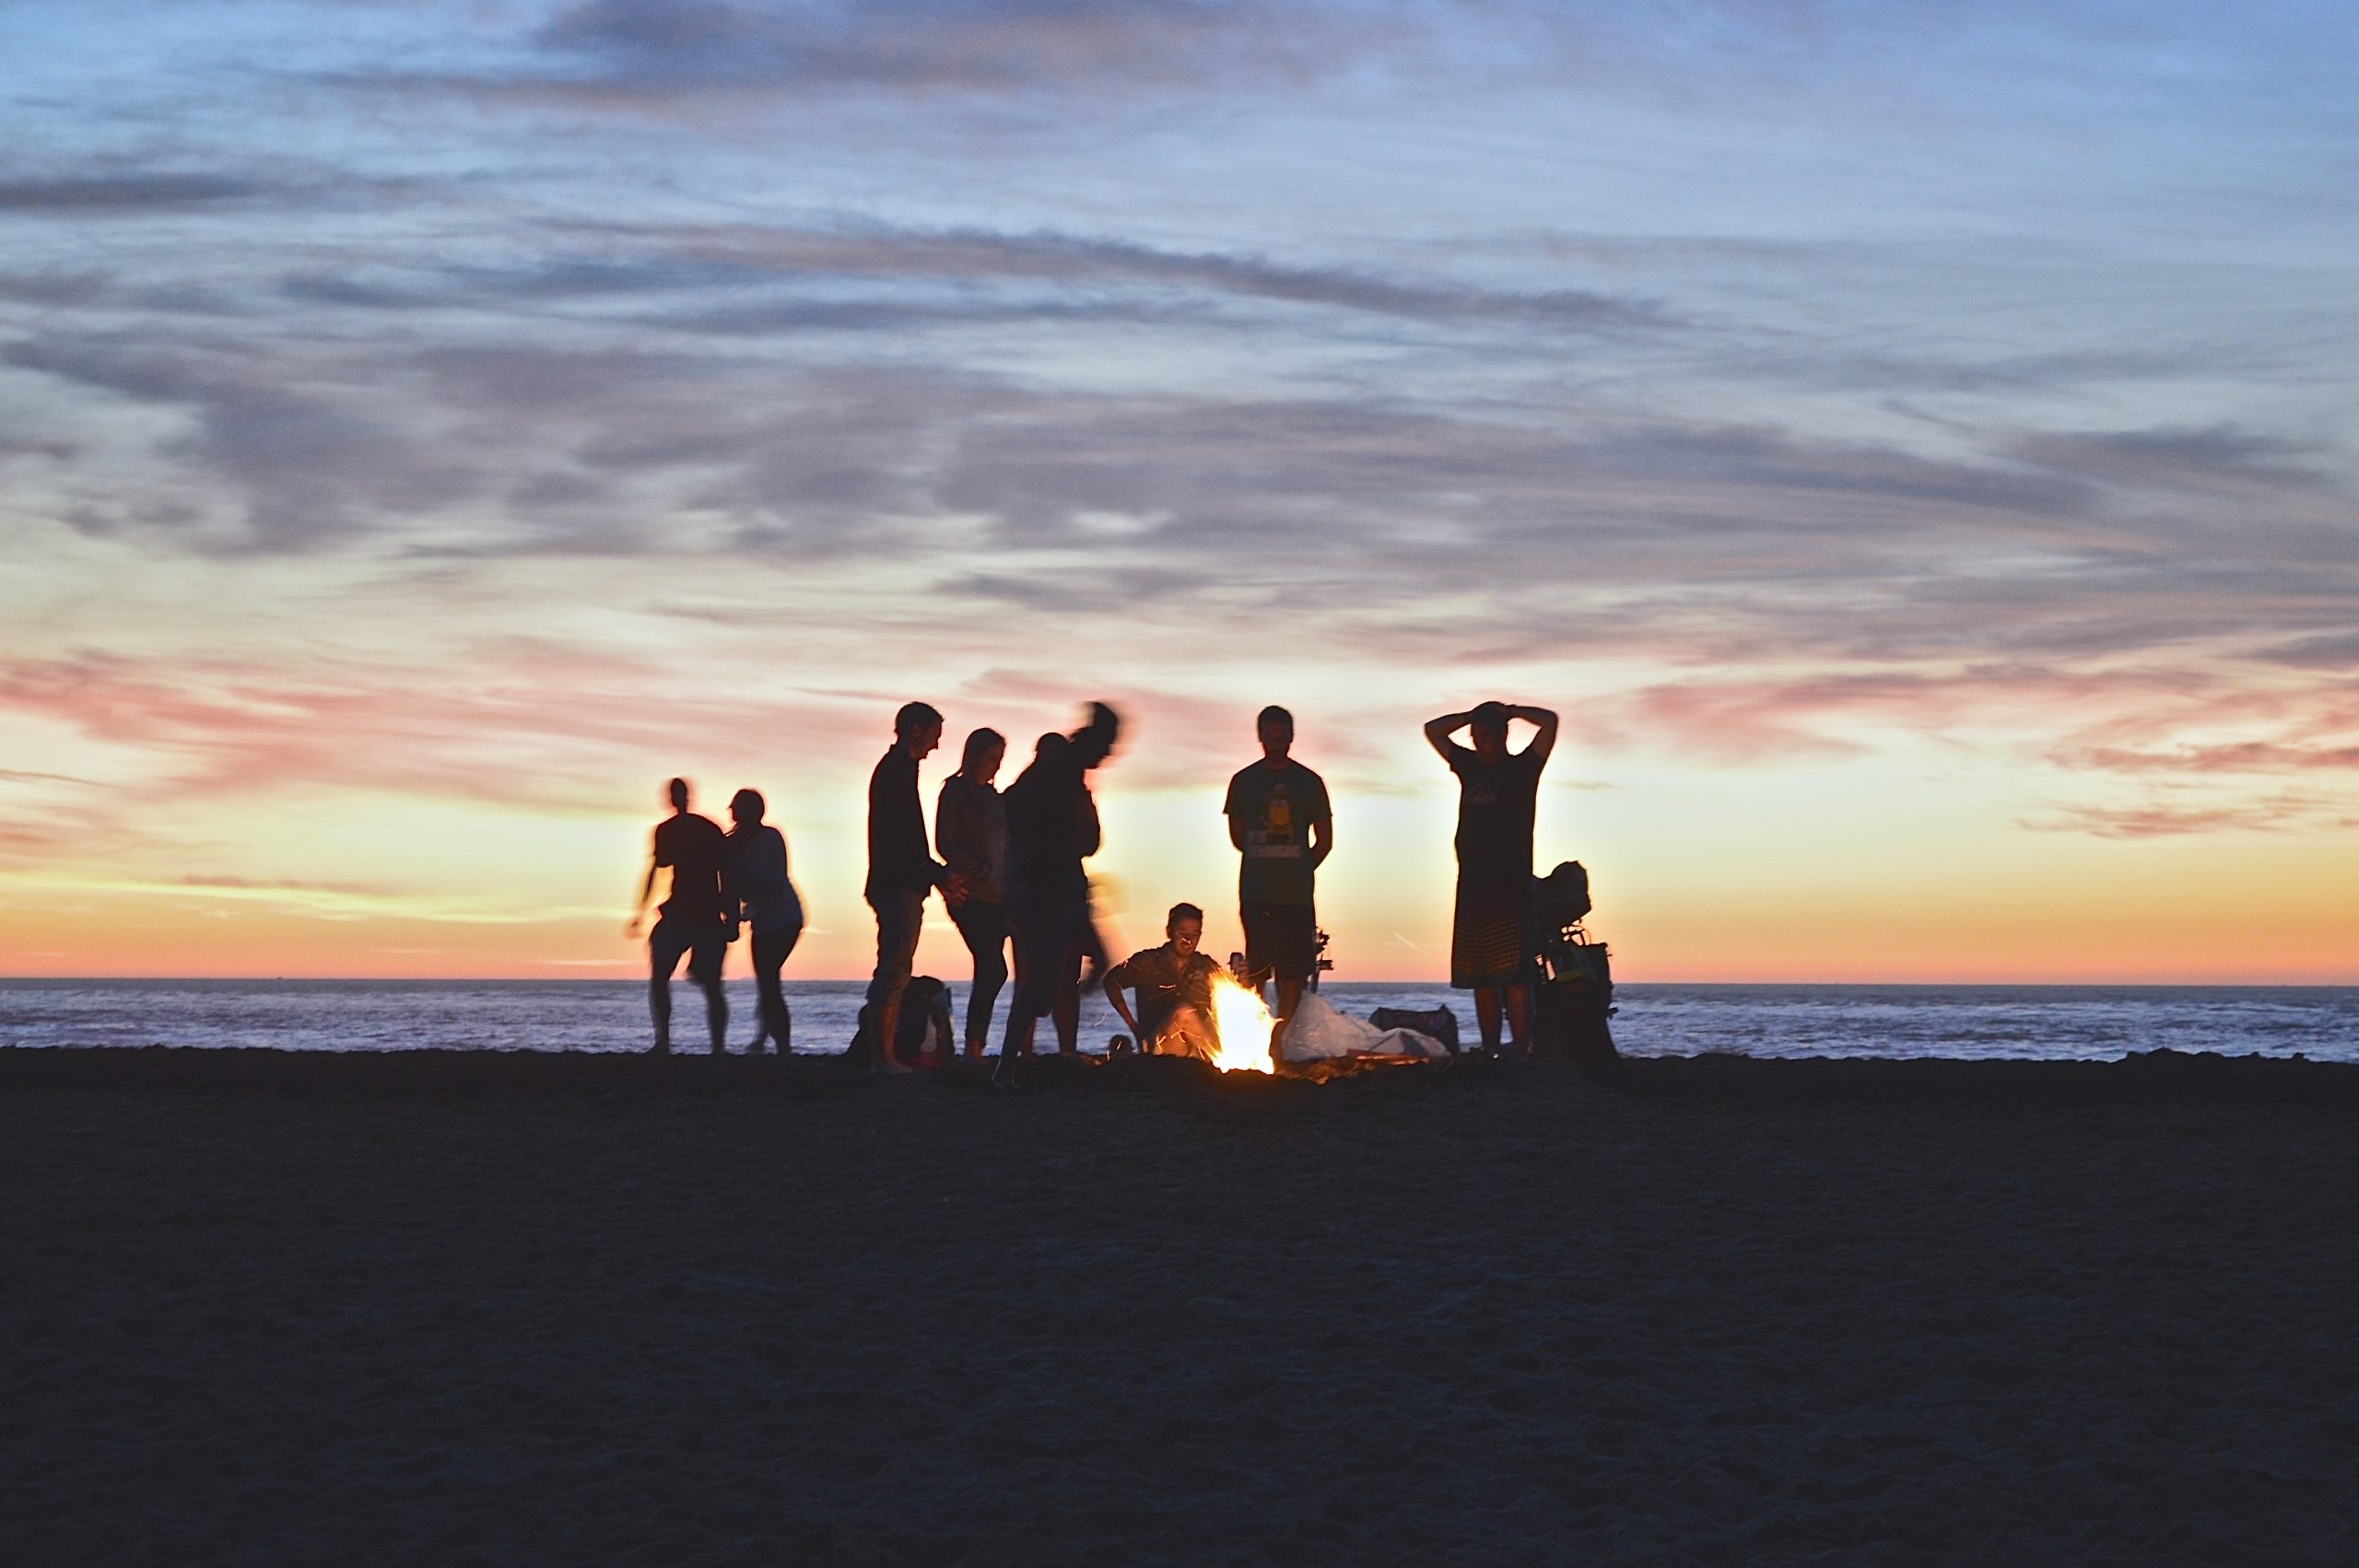 group of young people on the beach gathered around a bonfire at dusk